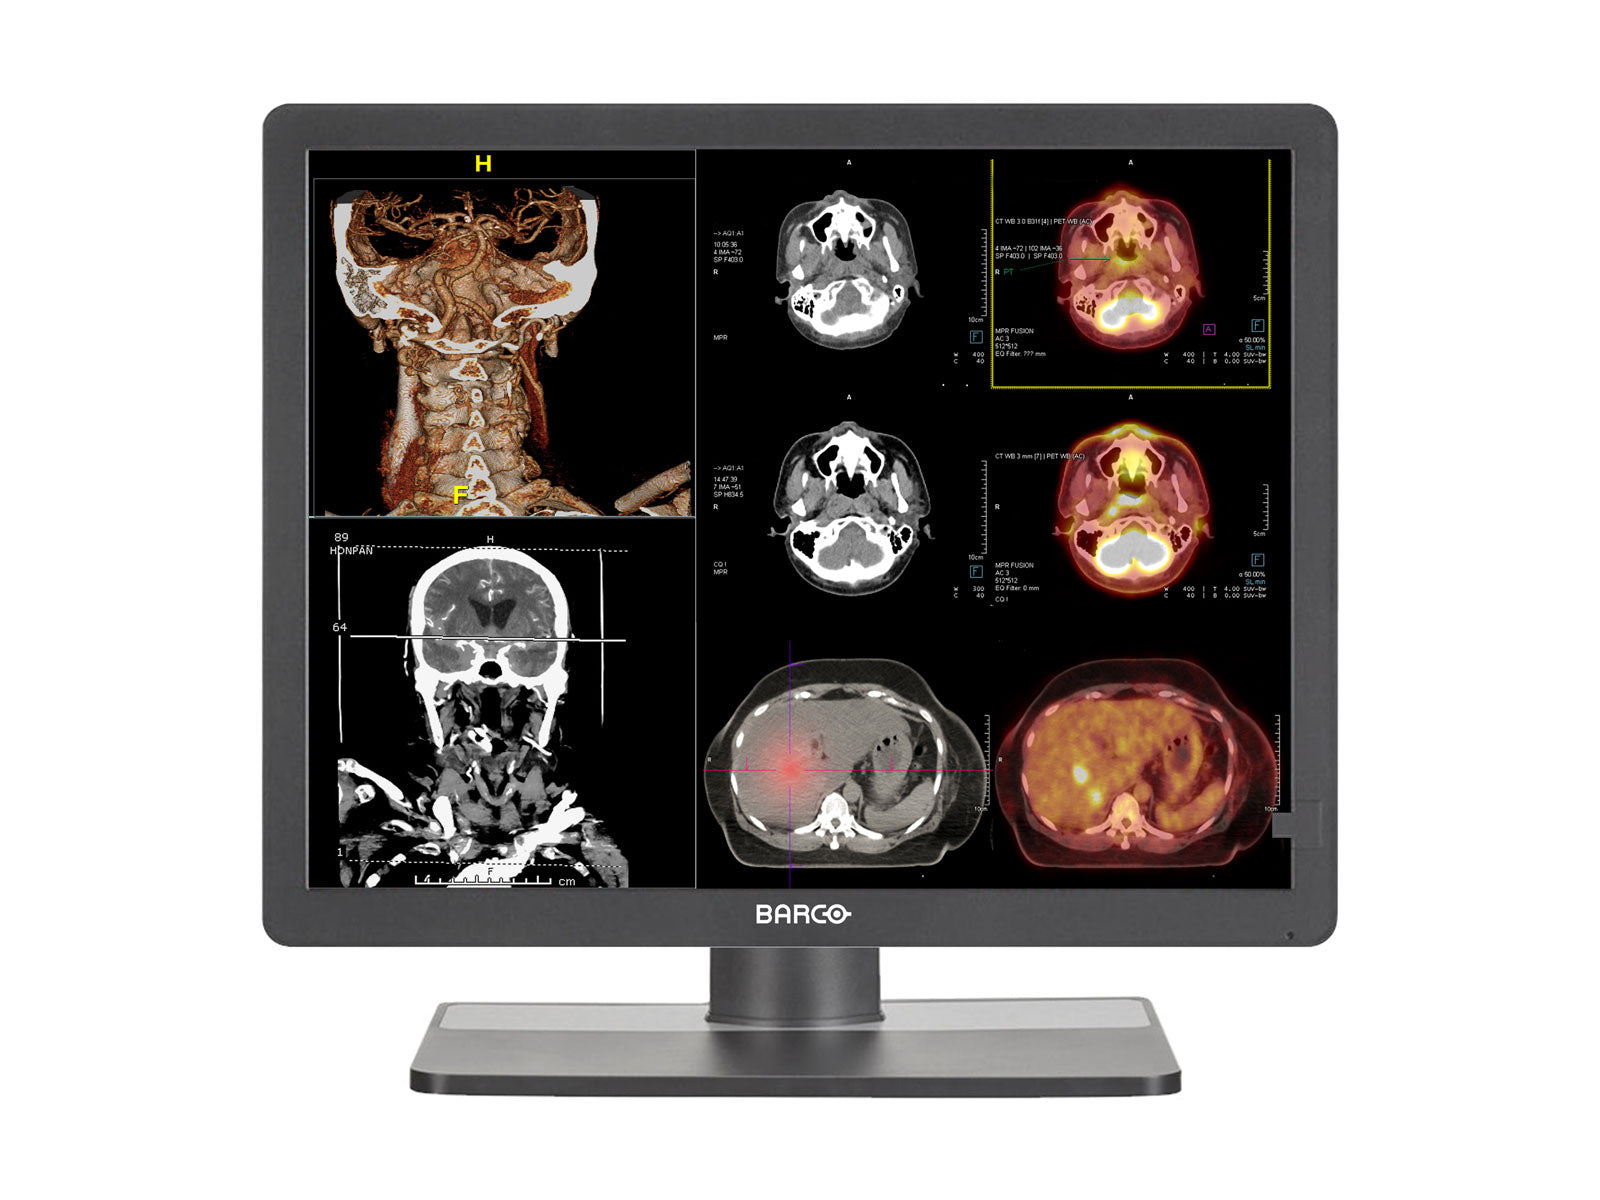 Barco Eonis MDRC-2321 2MP 21" Color Clinical Review Display Monitors.com 